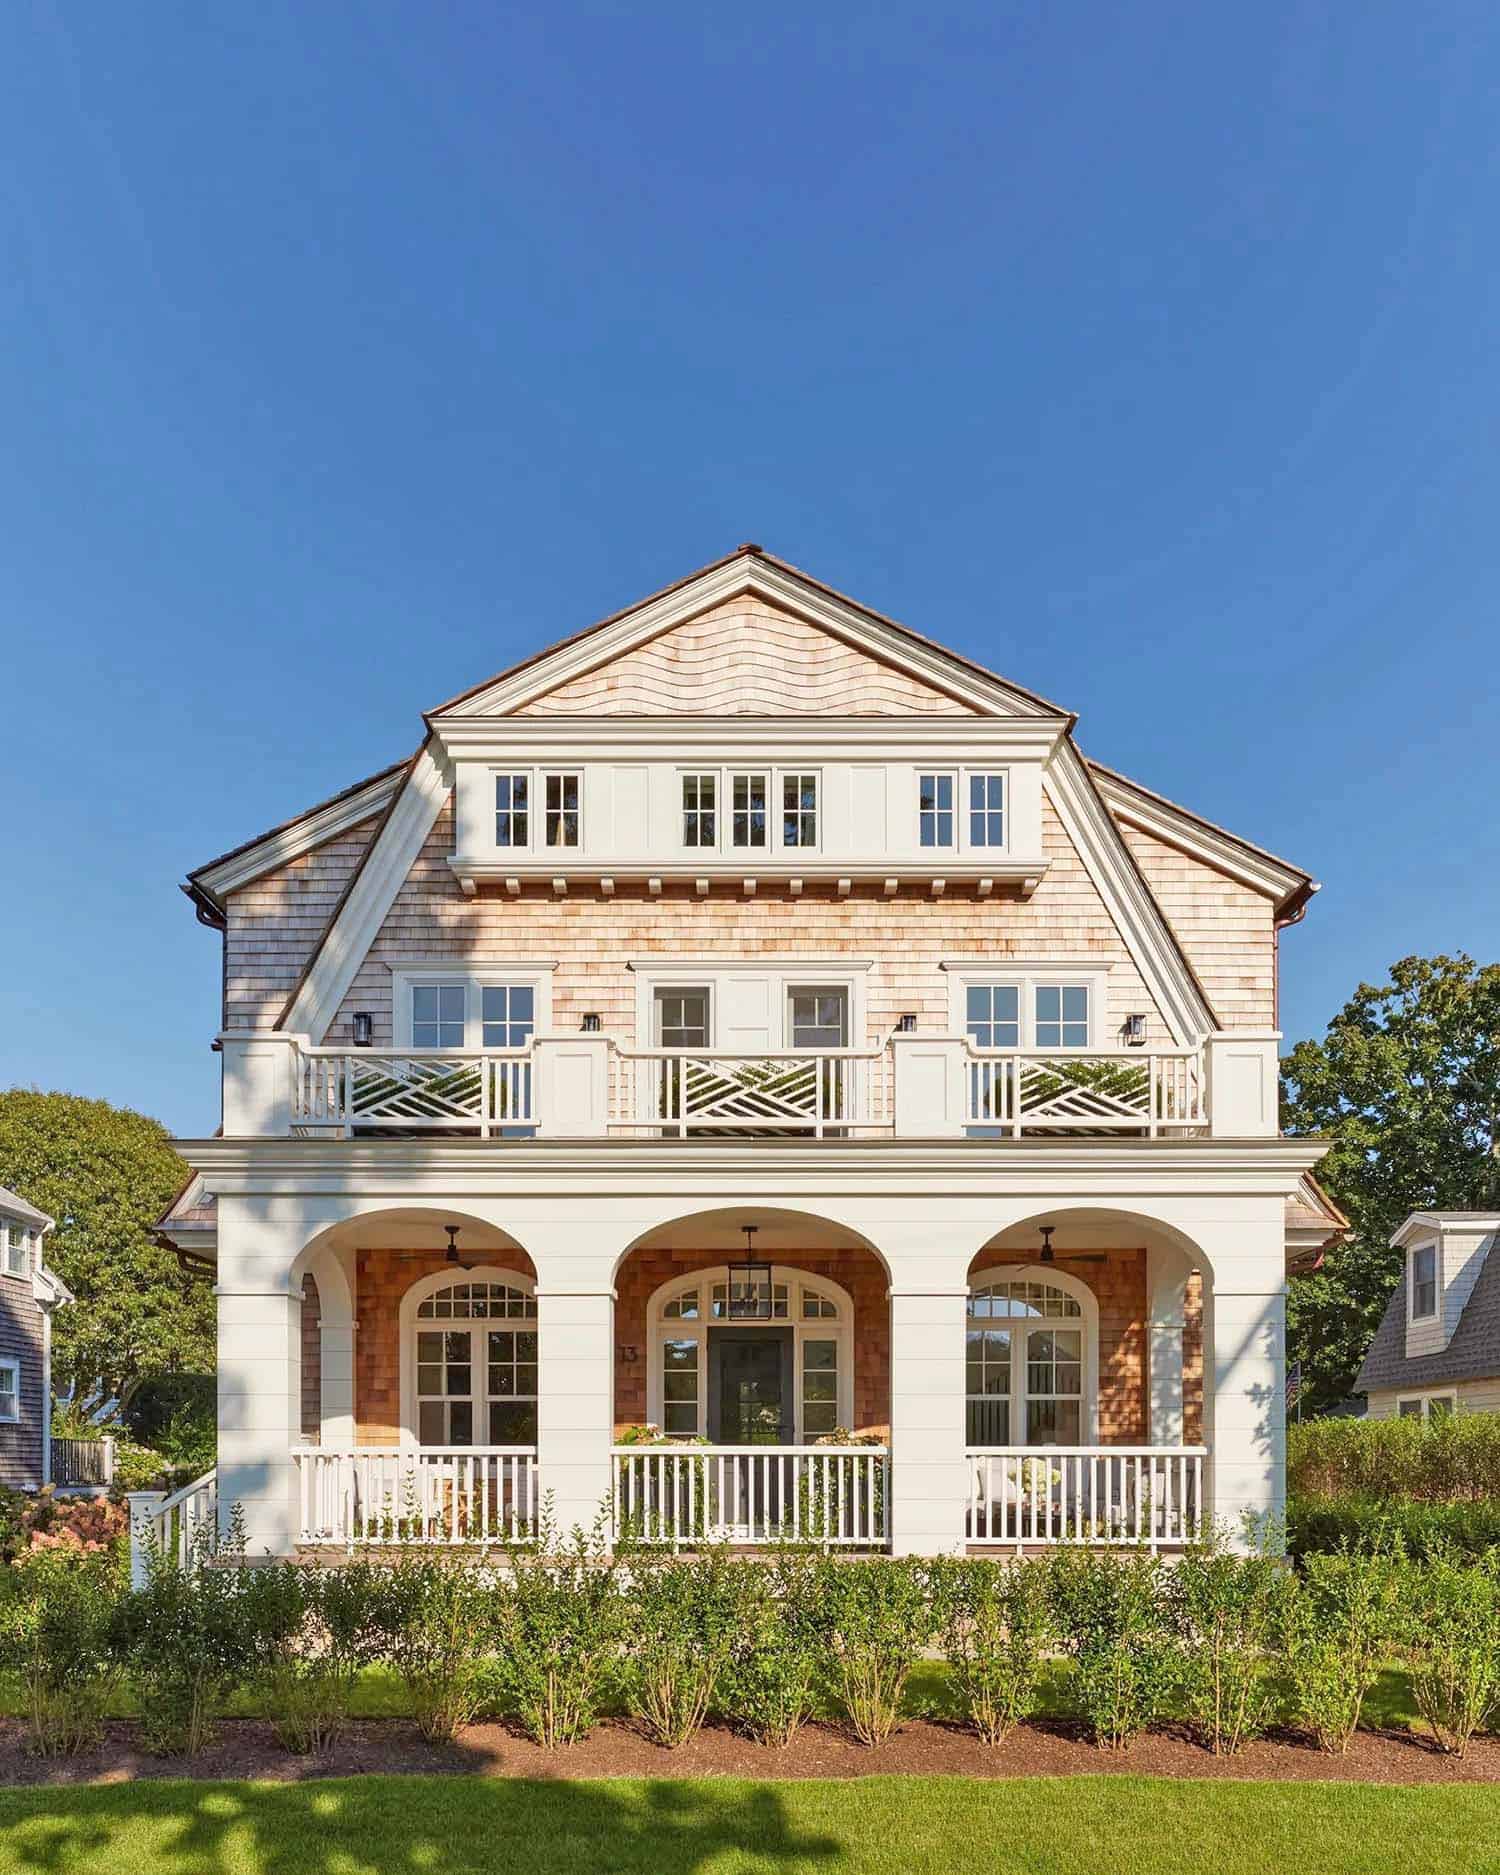 This shingle-style cape home offers a serene getaway in Massachusetts